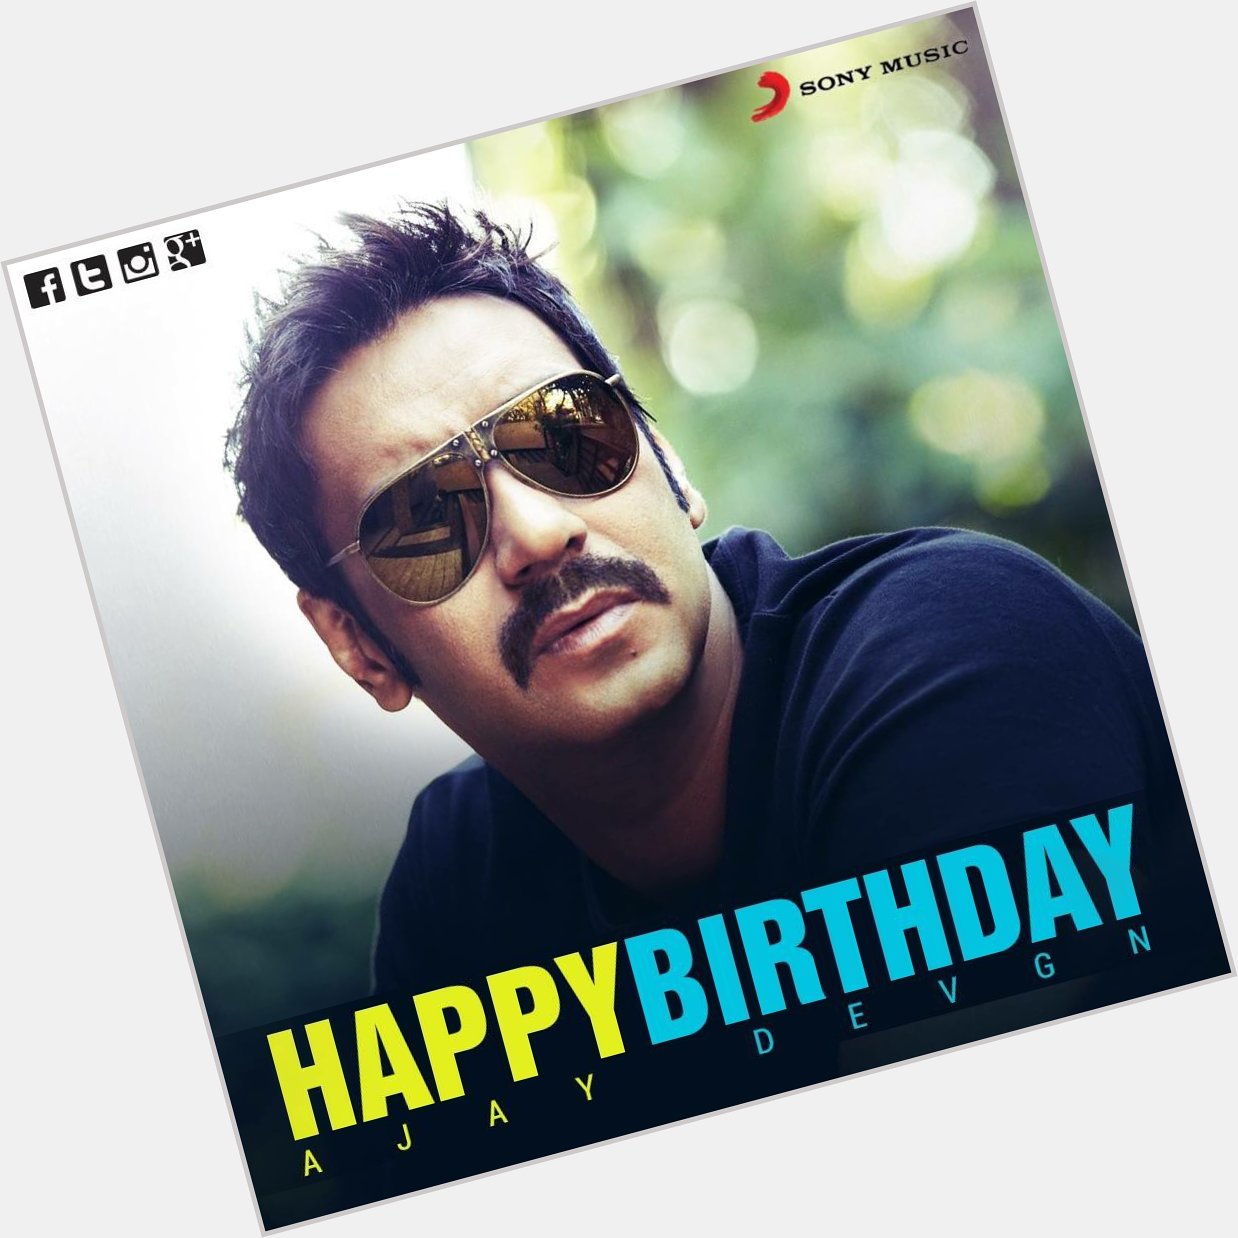 To one of the finest actors of our industry, Happy birthday Ajay Devgn. 